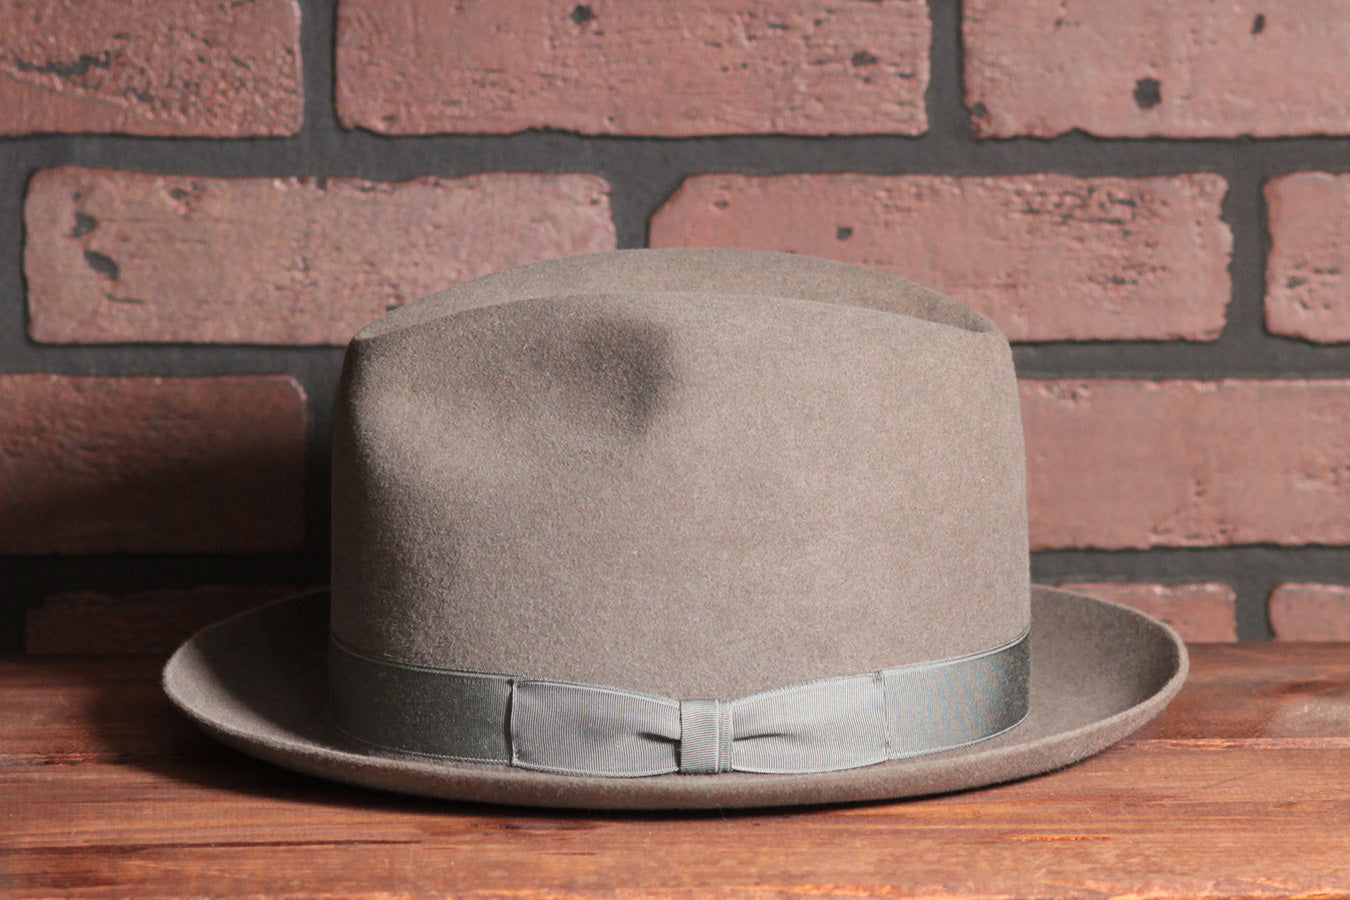 Inspired by the English Trilby-style hat worn by Sean Connery in Dr. No.